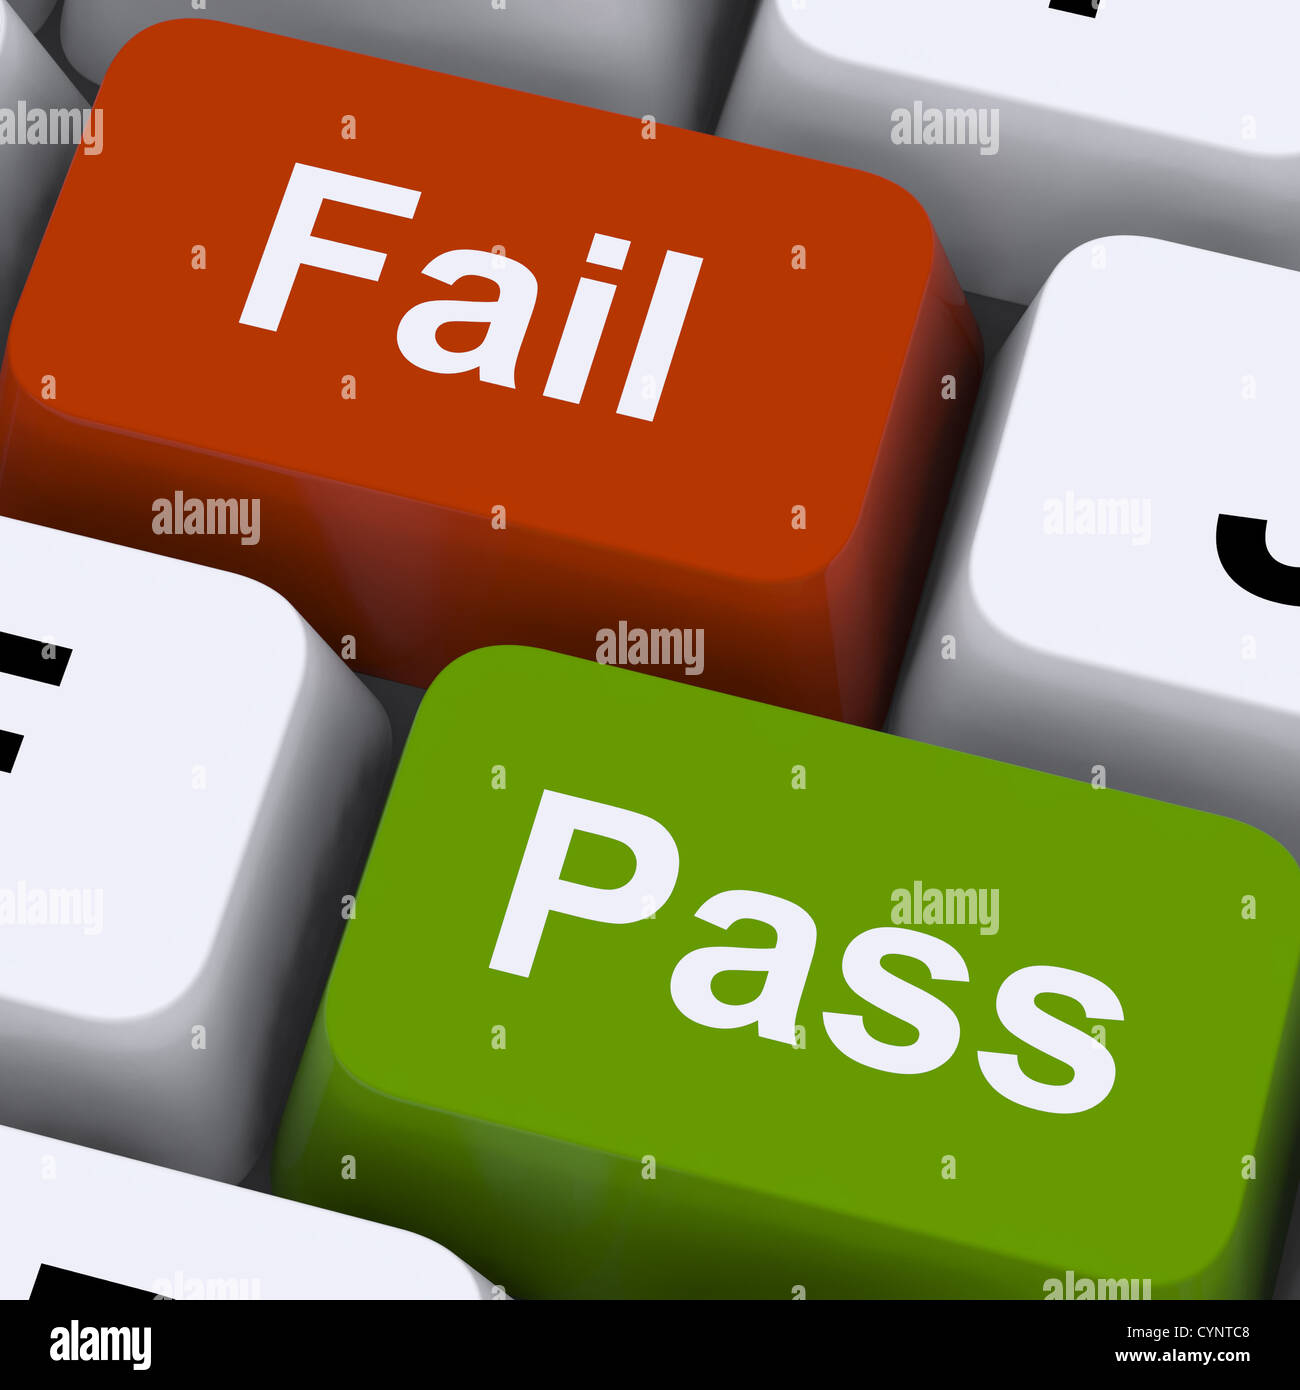 Pass Or Fail Keys To Show Exam Or Test Results Stock Photo